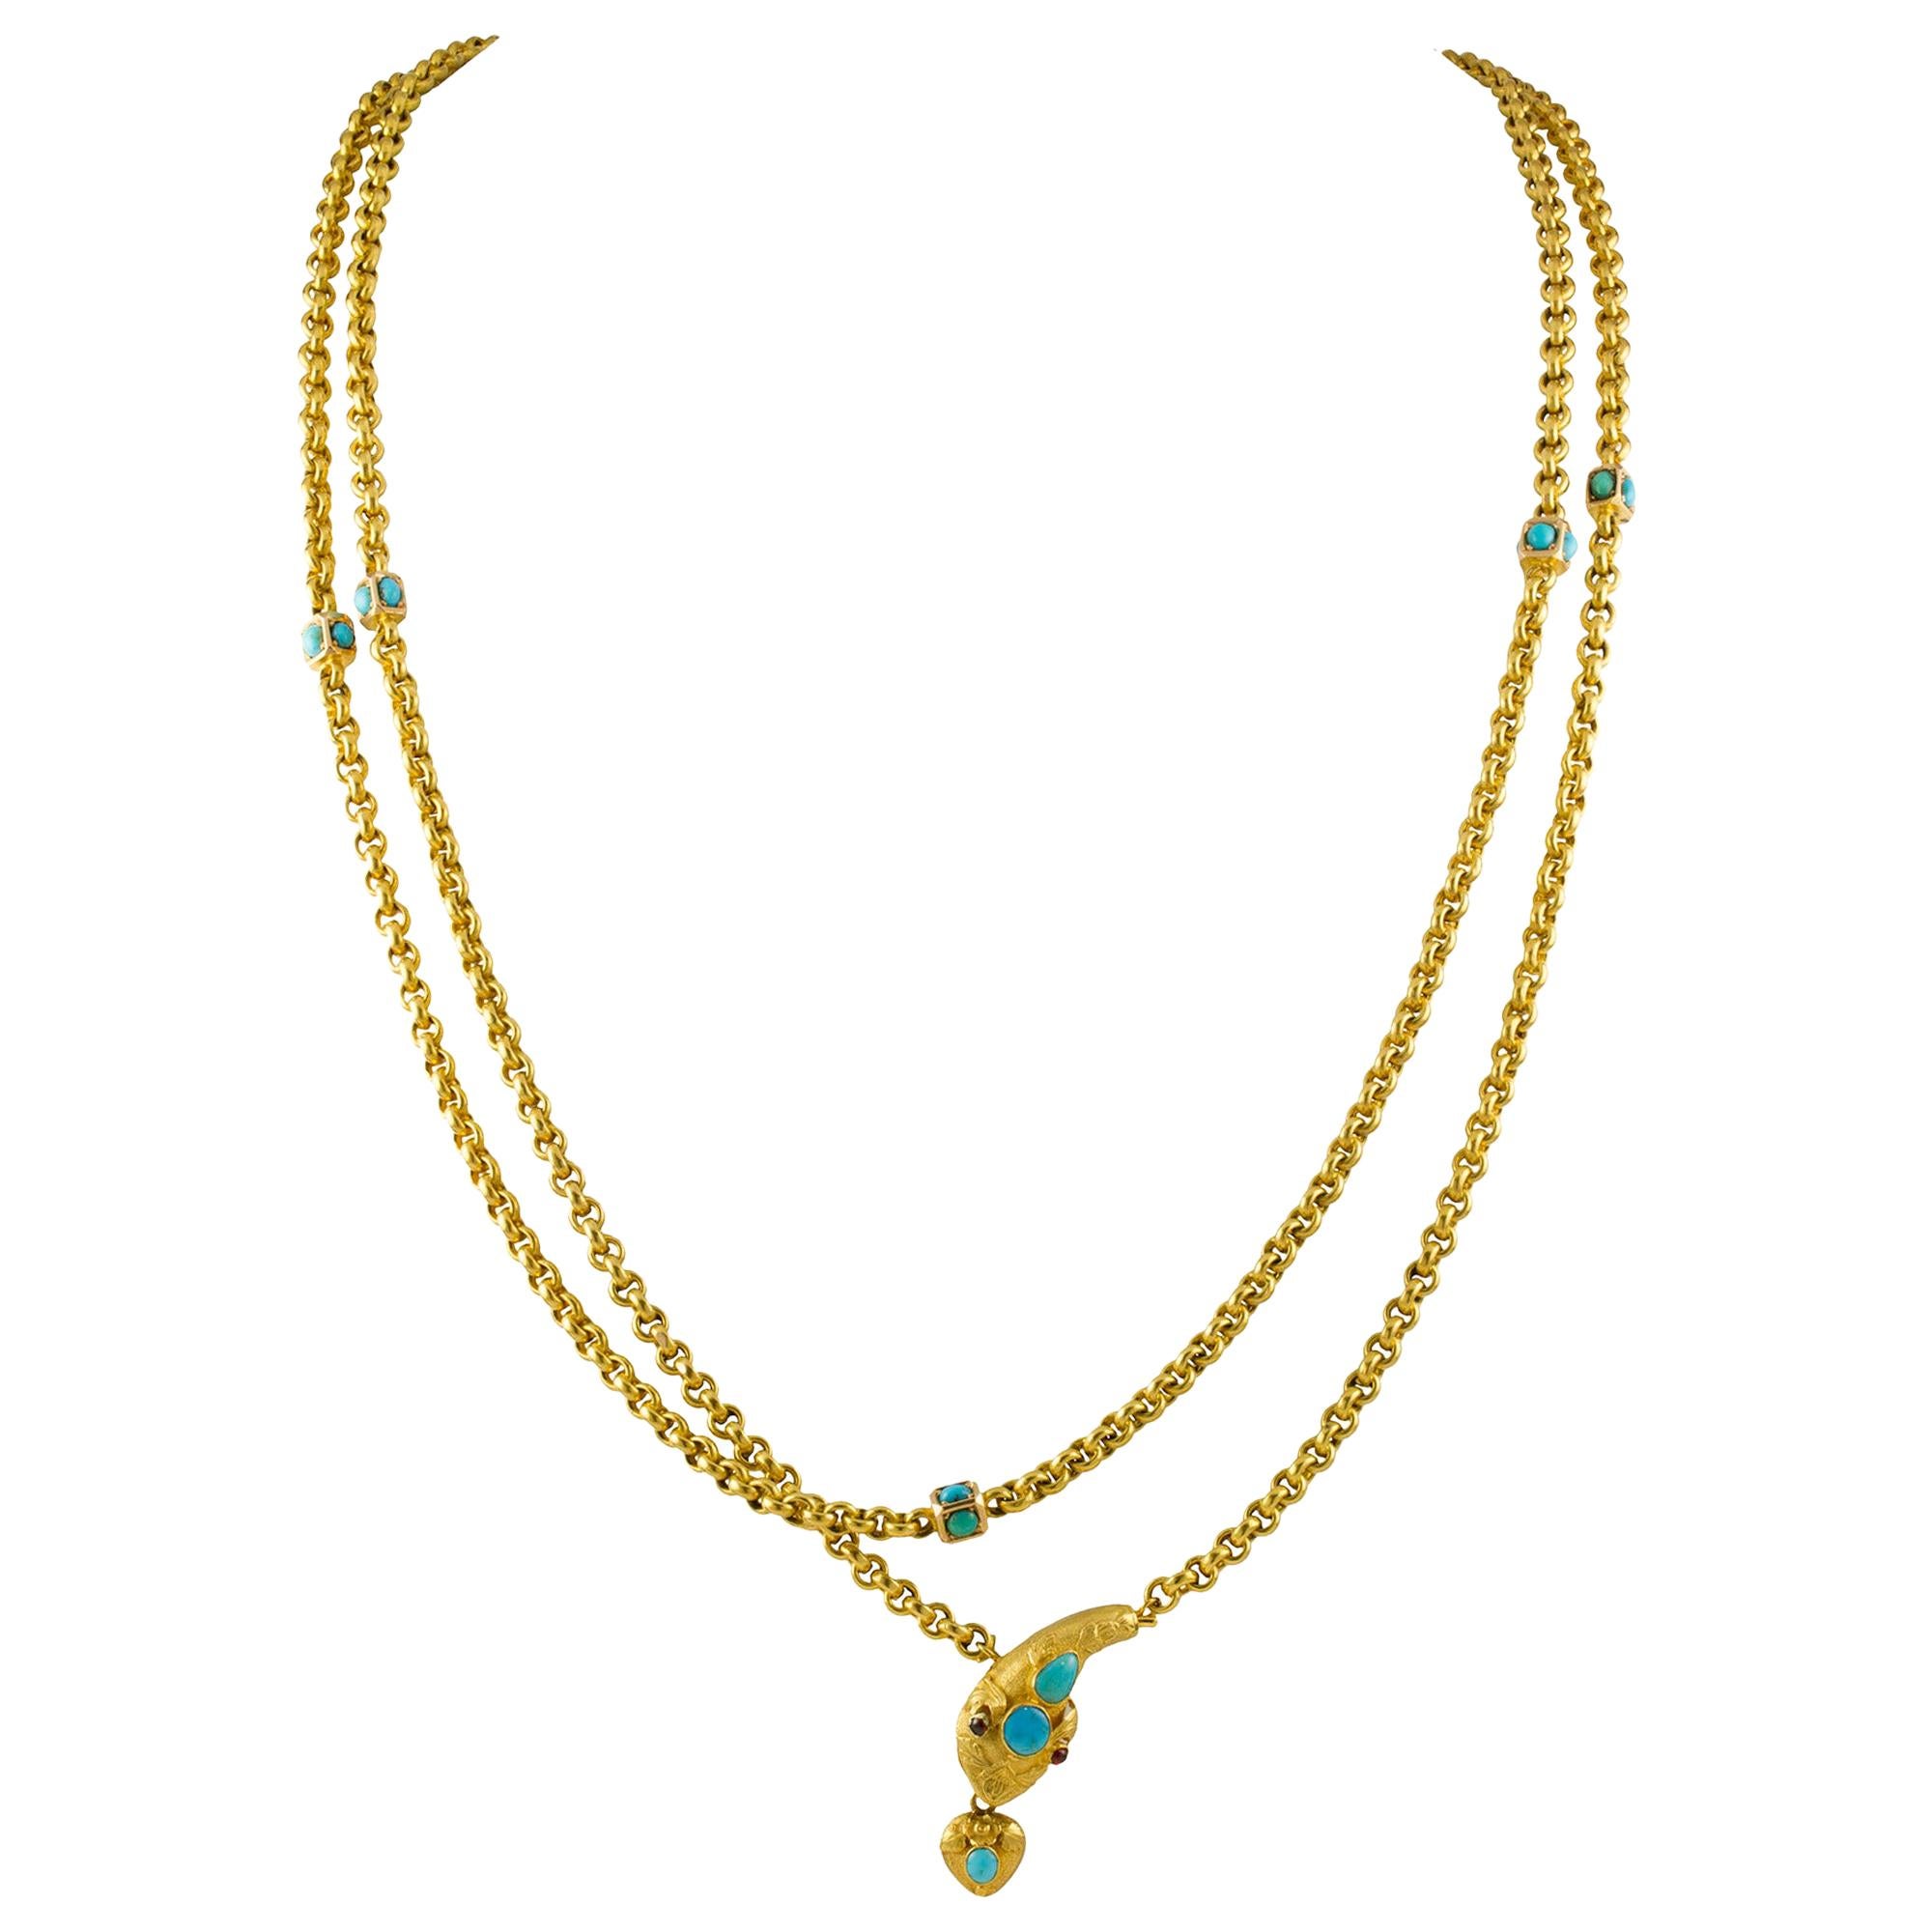 Victorian Turquoise and Gold Serpent Chain Necklace